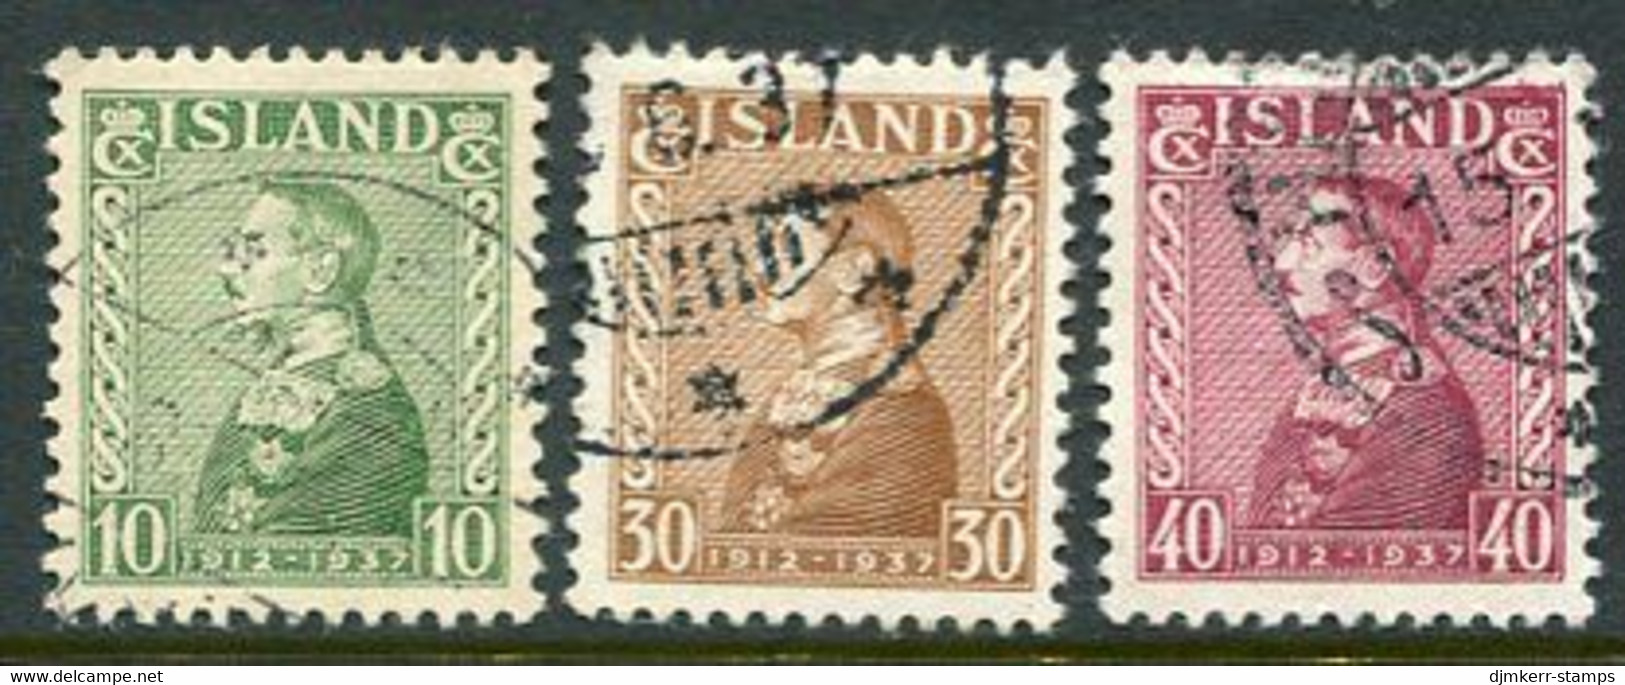 ICELAND  1937 25th Anniversary Of Regency Used.  Michel 187-189 - Used Stamps